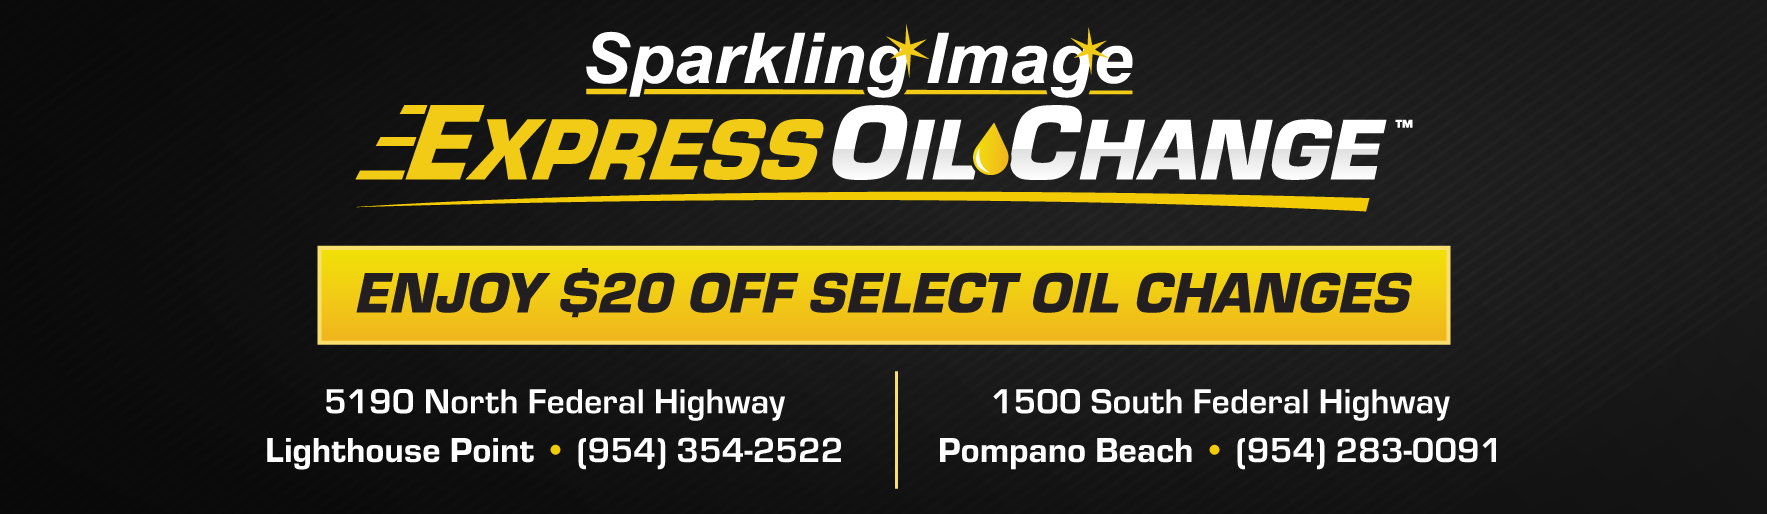 Sparkling Image Express Oil Change - $20 Off Select Oil changes in South Florida